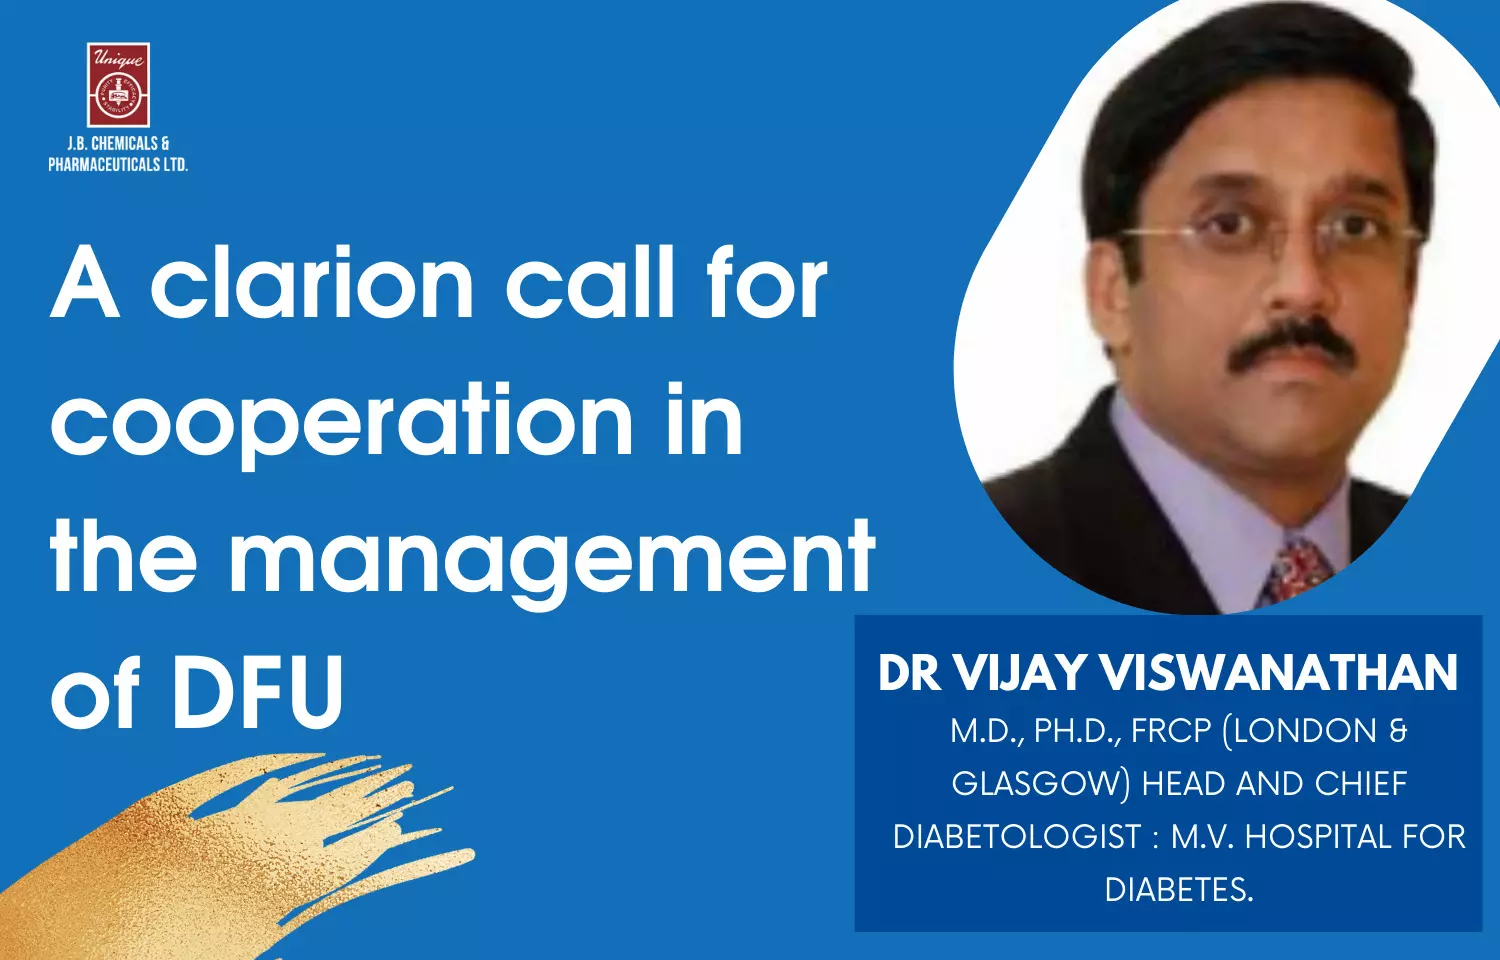 A clarion call for cooperation in the management of DFU